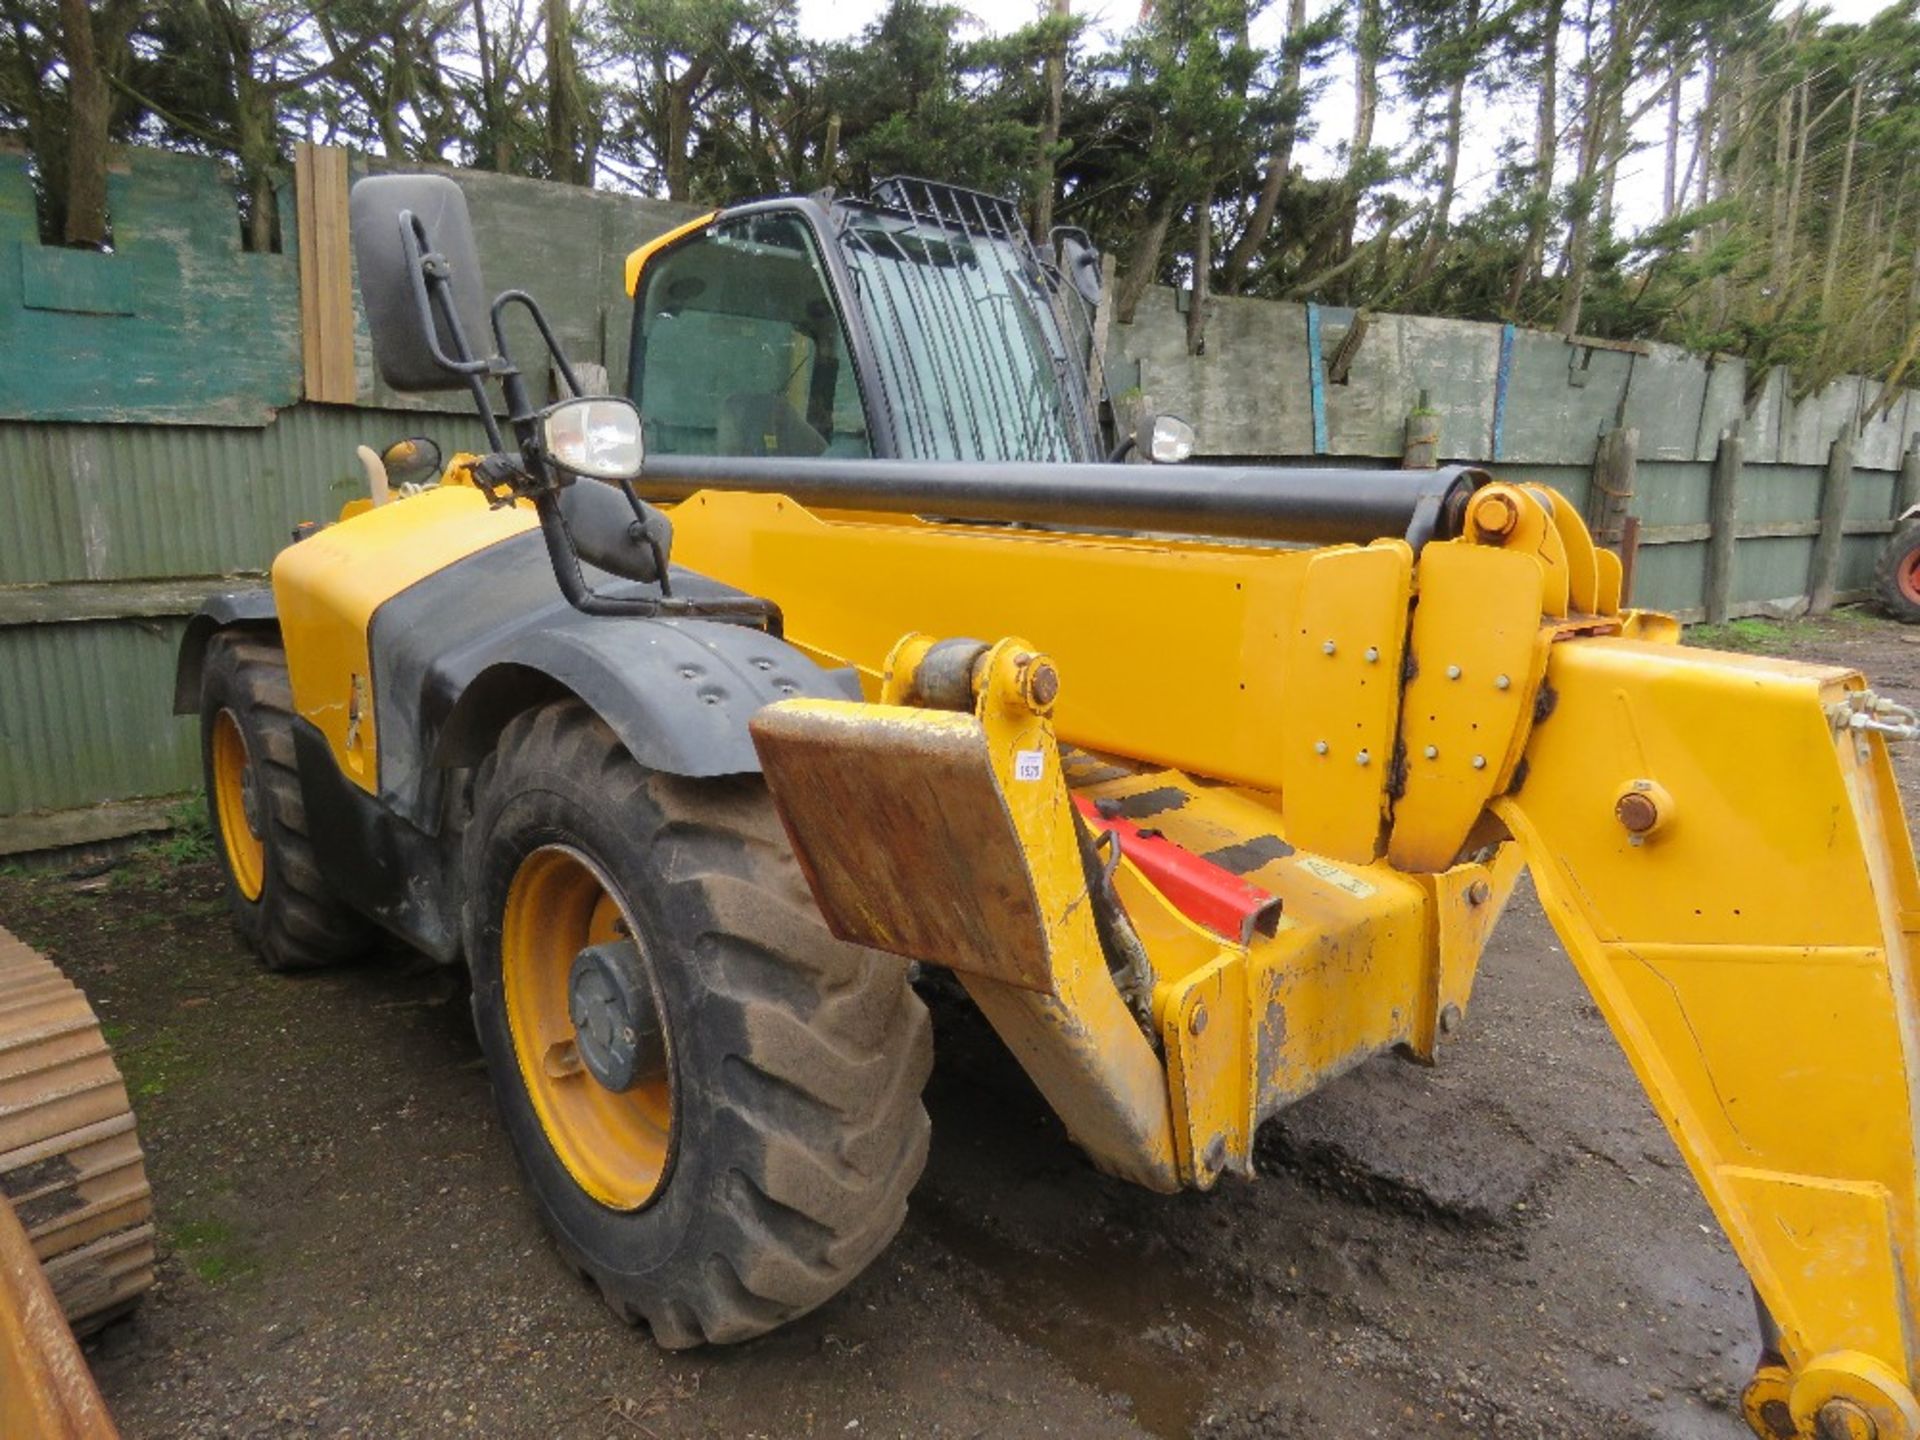 JCB 540-140 TELEHANDLER REG:RV17 YGT WITH V5. 14METRE REACH, 4 TONNE LIFT OWNED FROM NEW BY THE COMP - Image 2 of 23